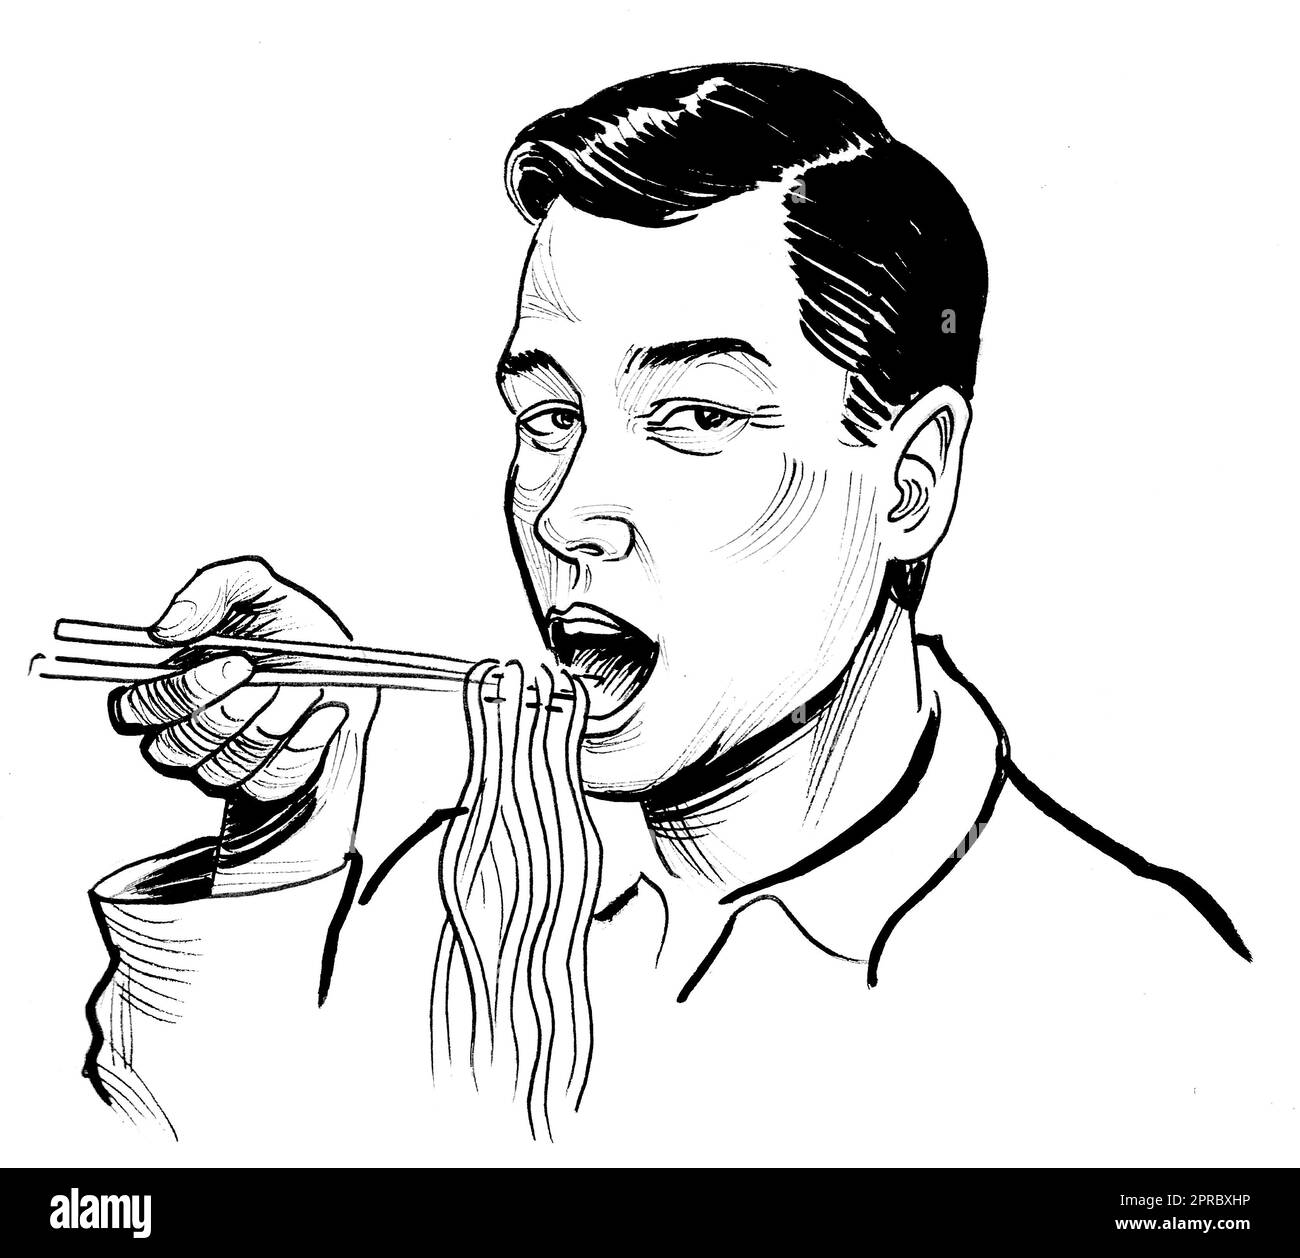 Asian man eating noodles with chopsticks. Hand drawn on paper, retro styled ink black and white illustration Stock Photo